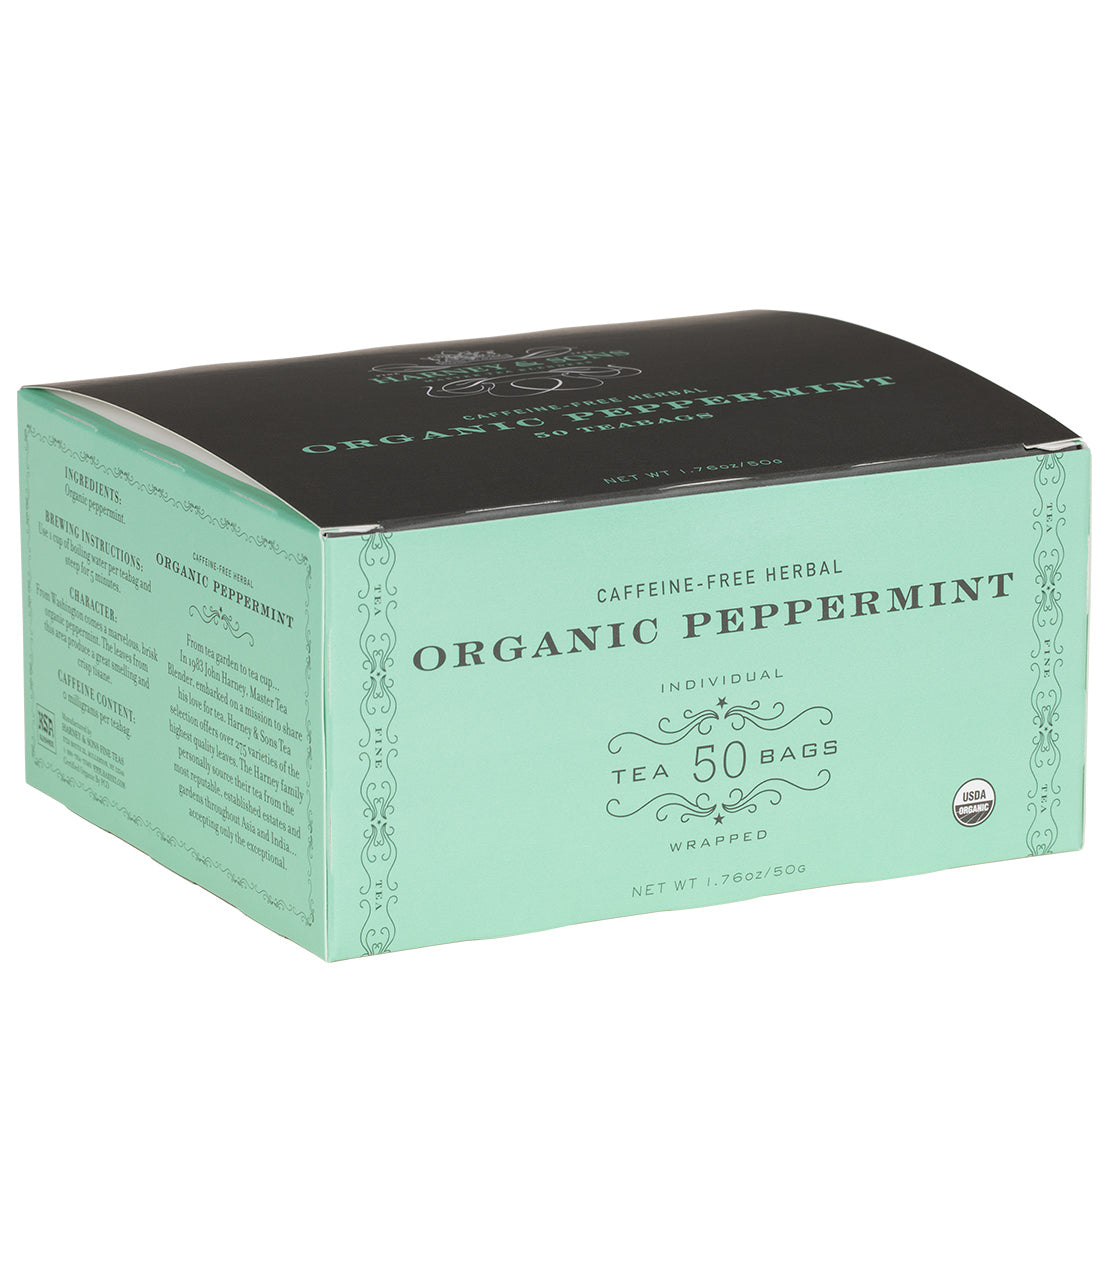 Organic Peppermint Herbal, Box of 50 Foil Wrapped Teabags - Teabags Box of 50 Foil Wrapped Teabags - Harney & Sons Fine Teas